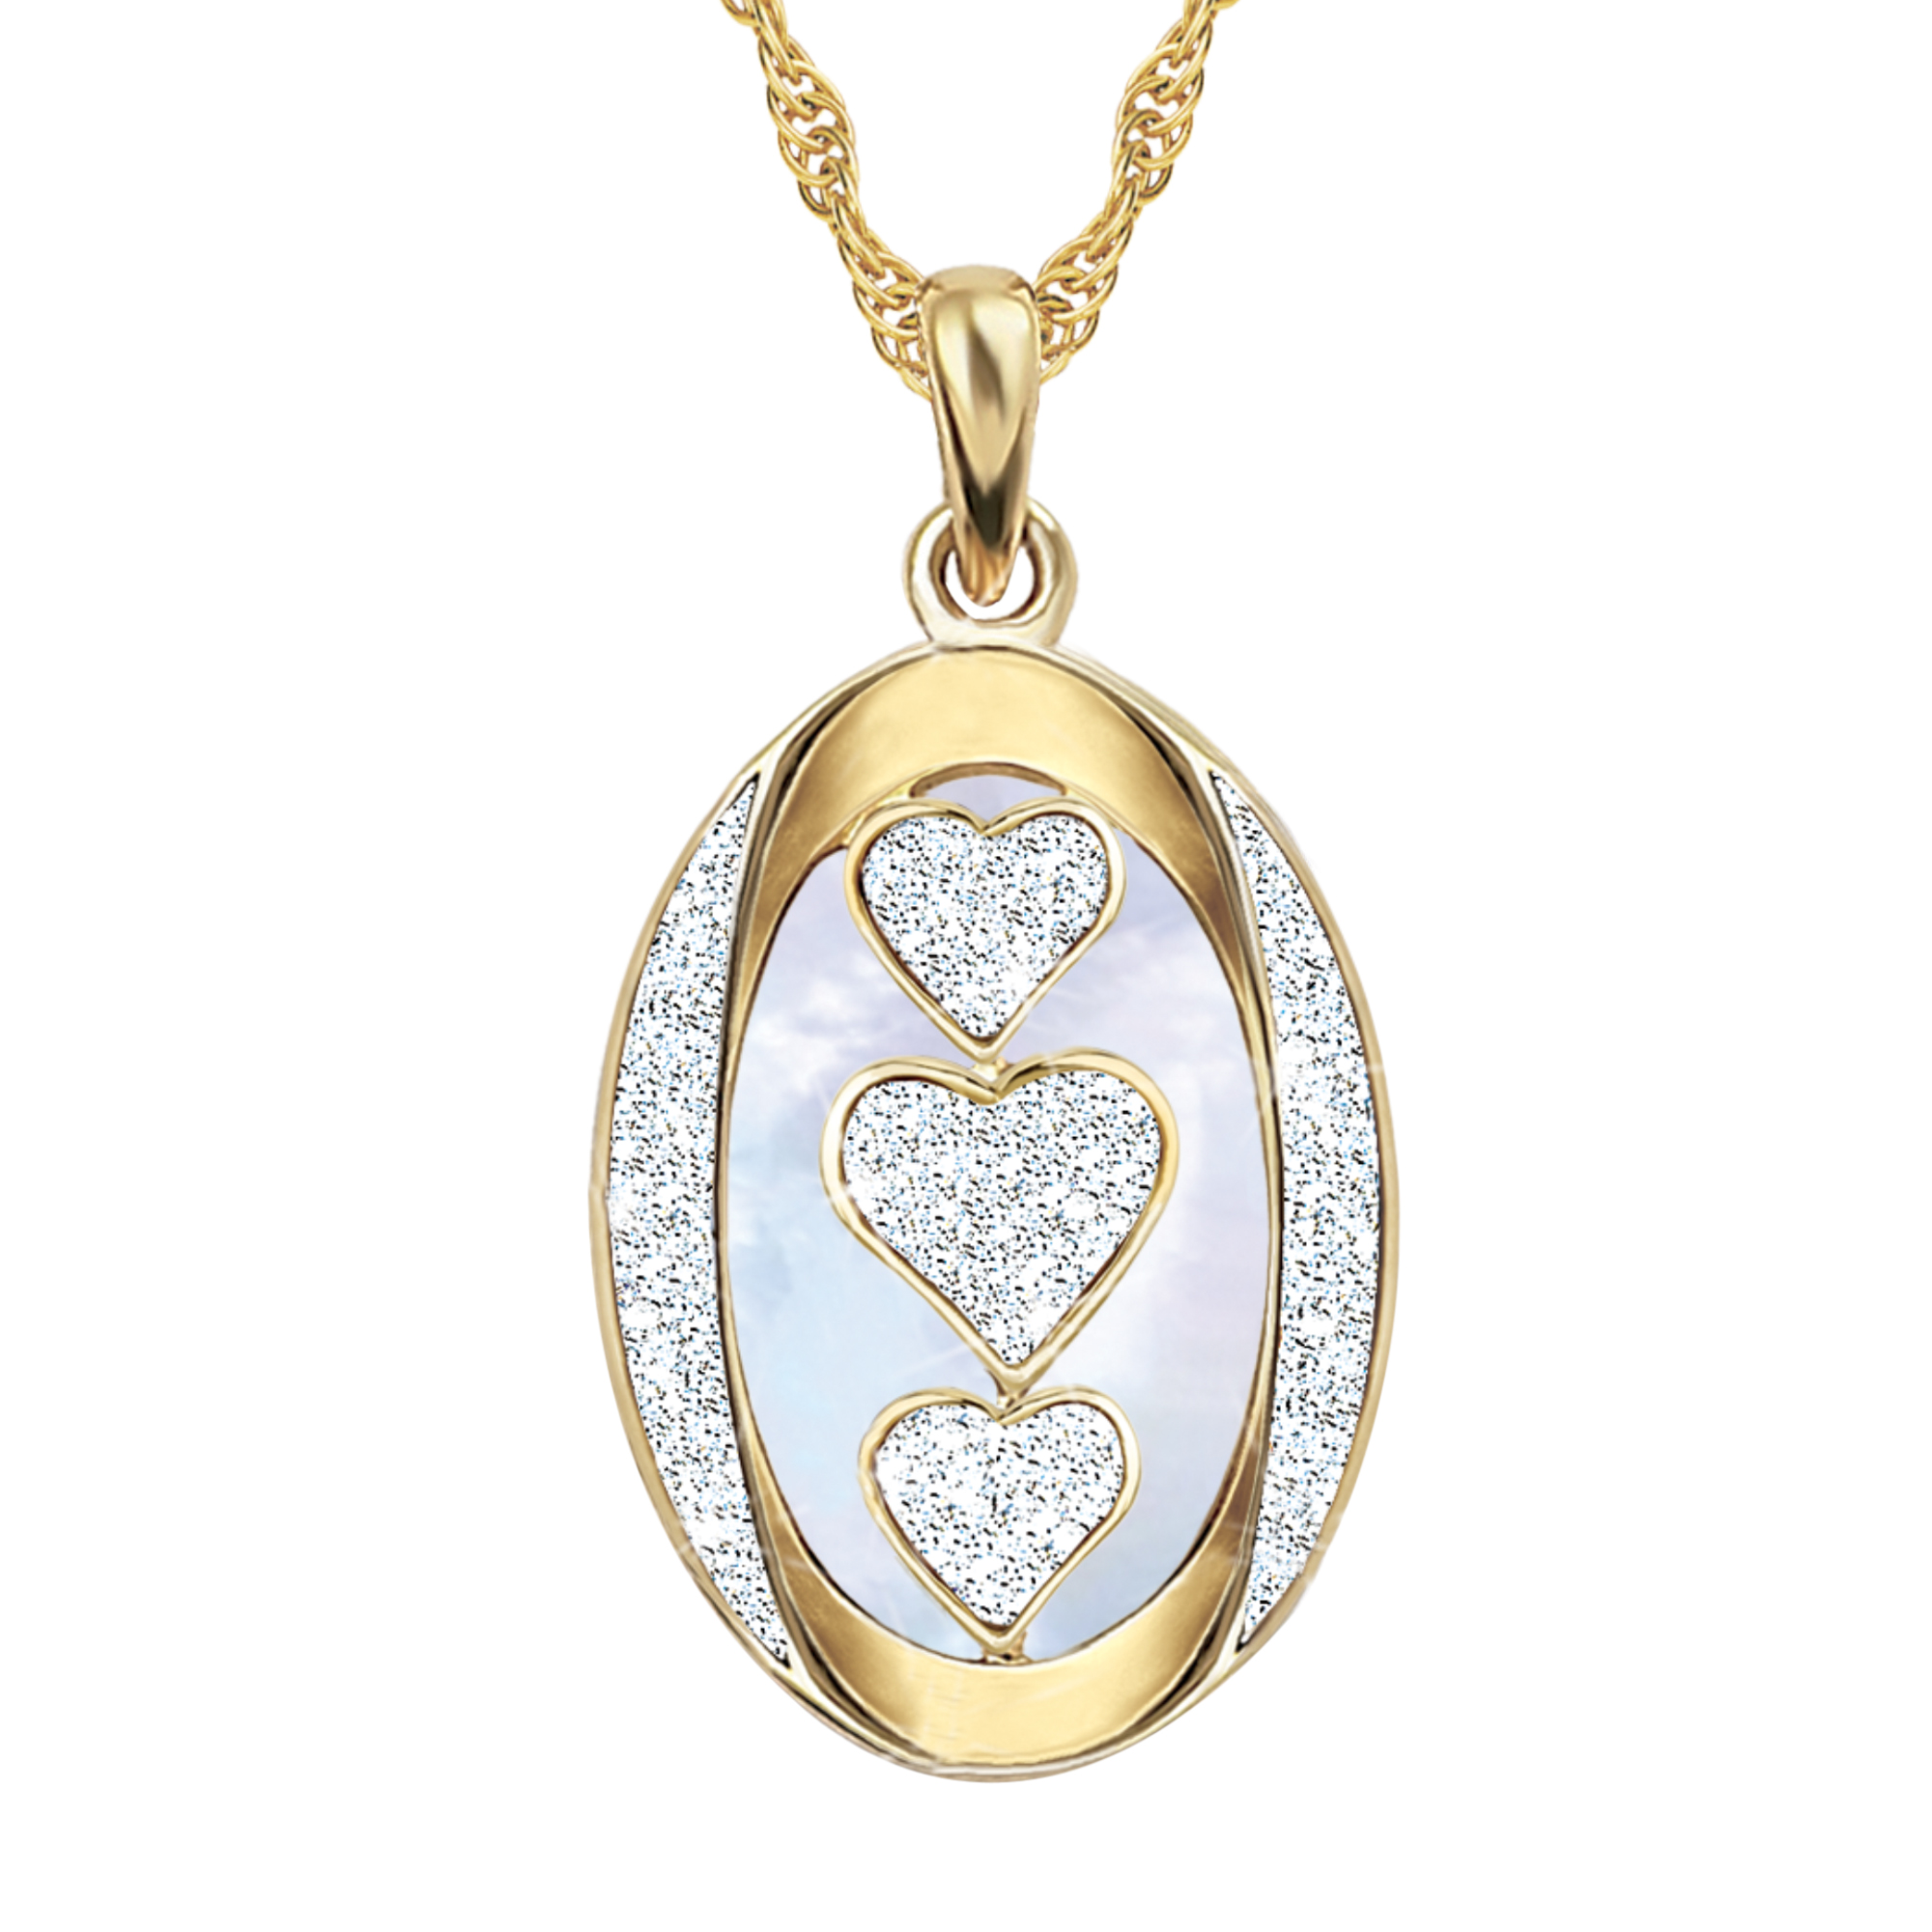 My Daughter I Love You Personalized Diamond Pendant 1162 0127 a main